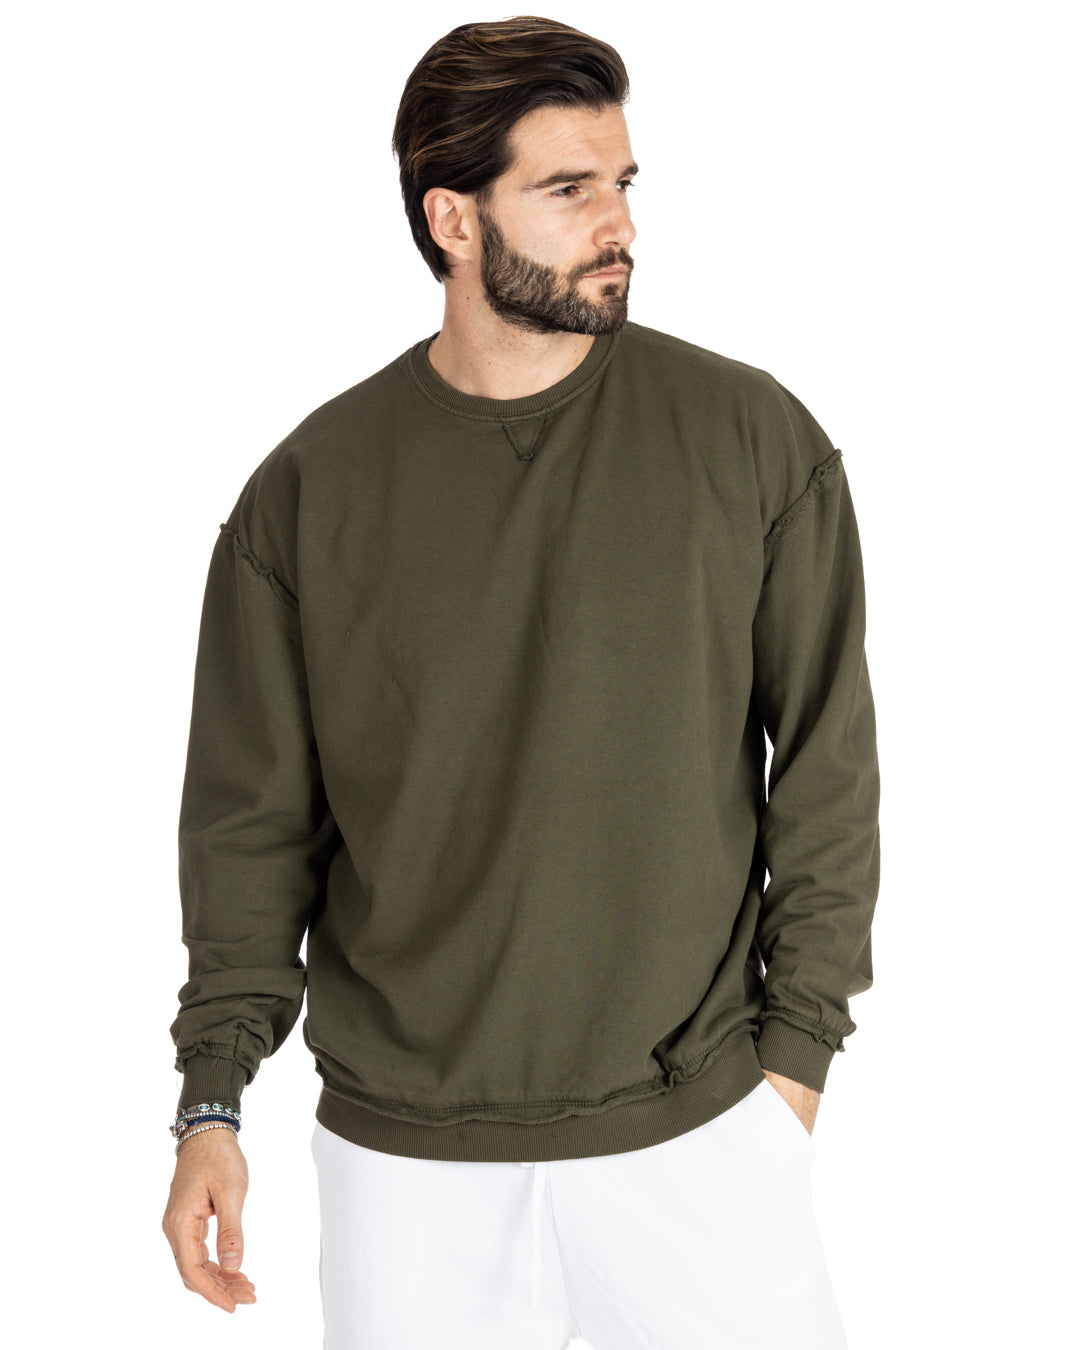 KYOTO - OVERSIZED SWEATSHIRT WITH VISIBLE GREEN STITCHING